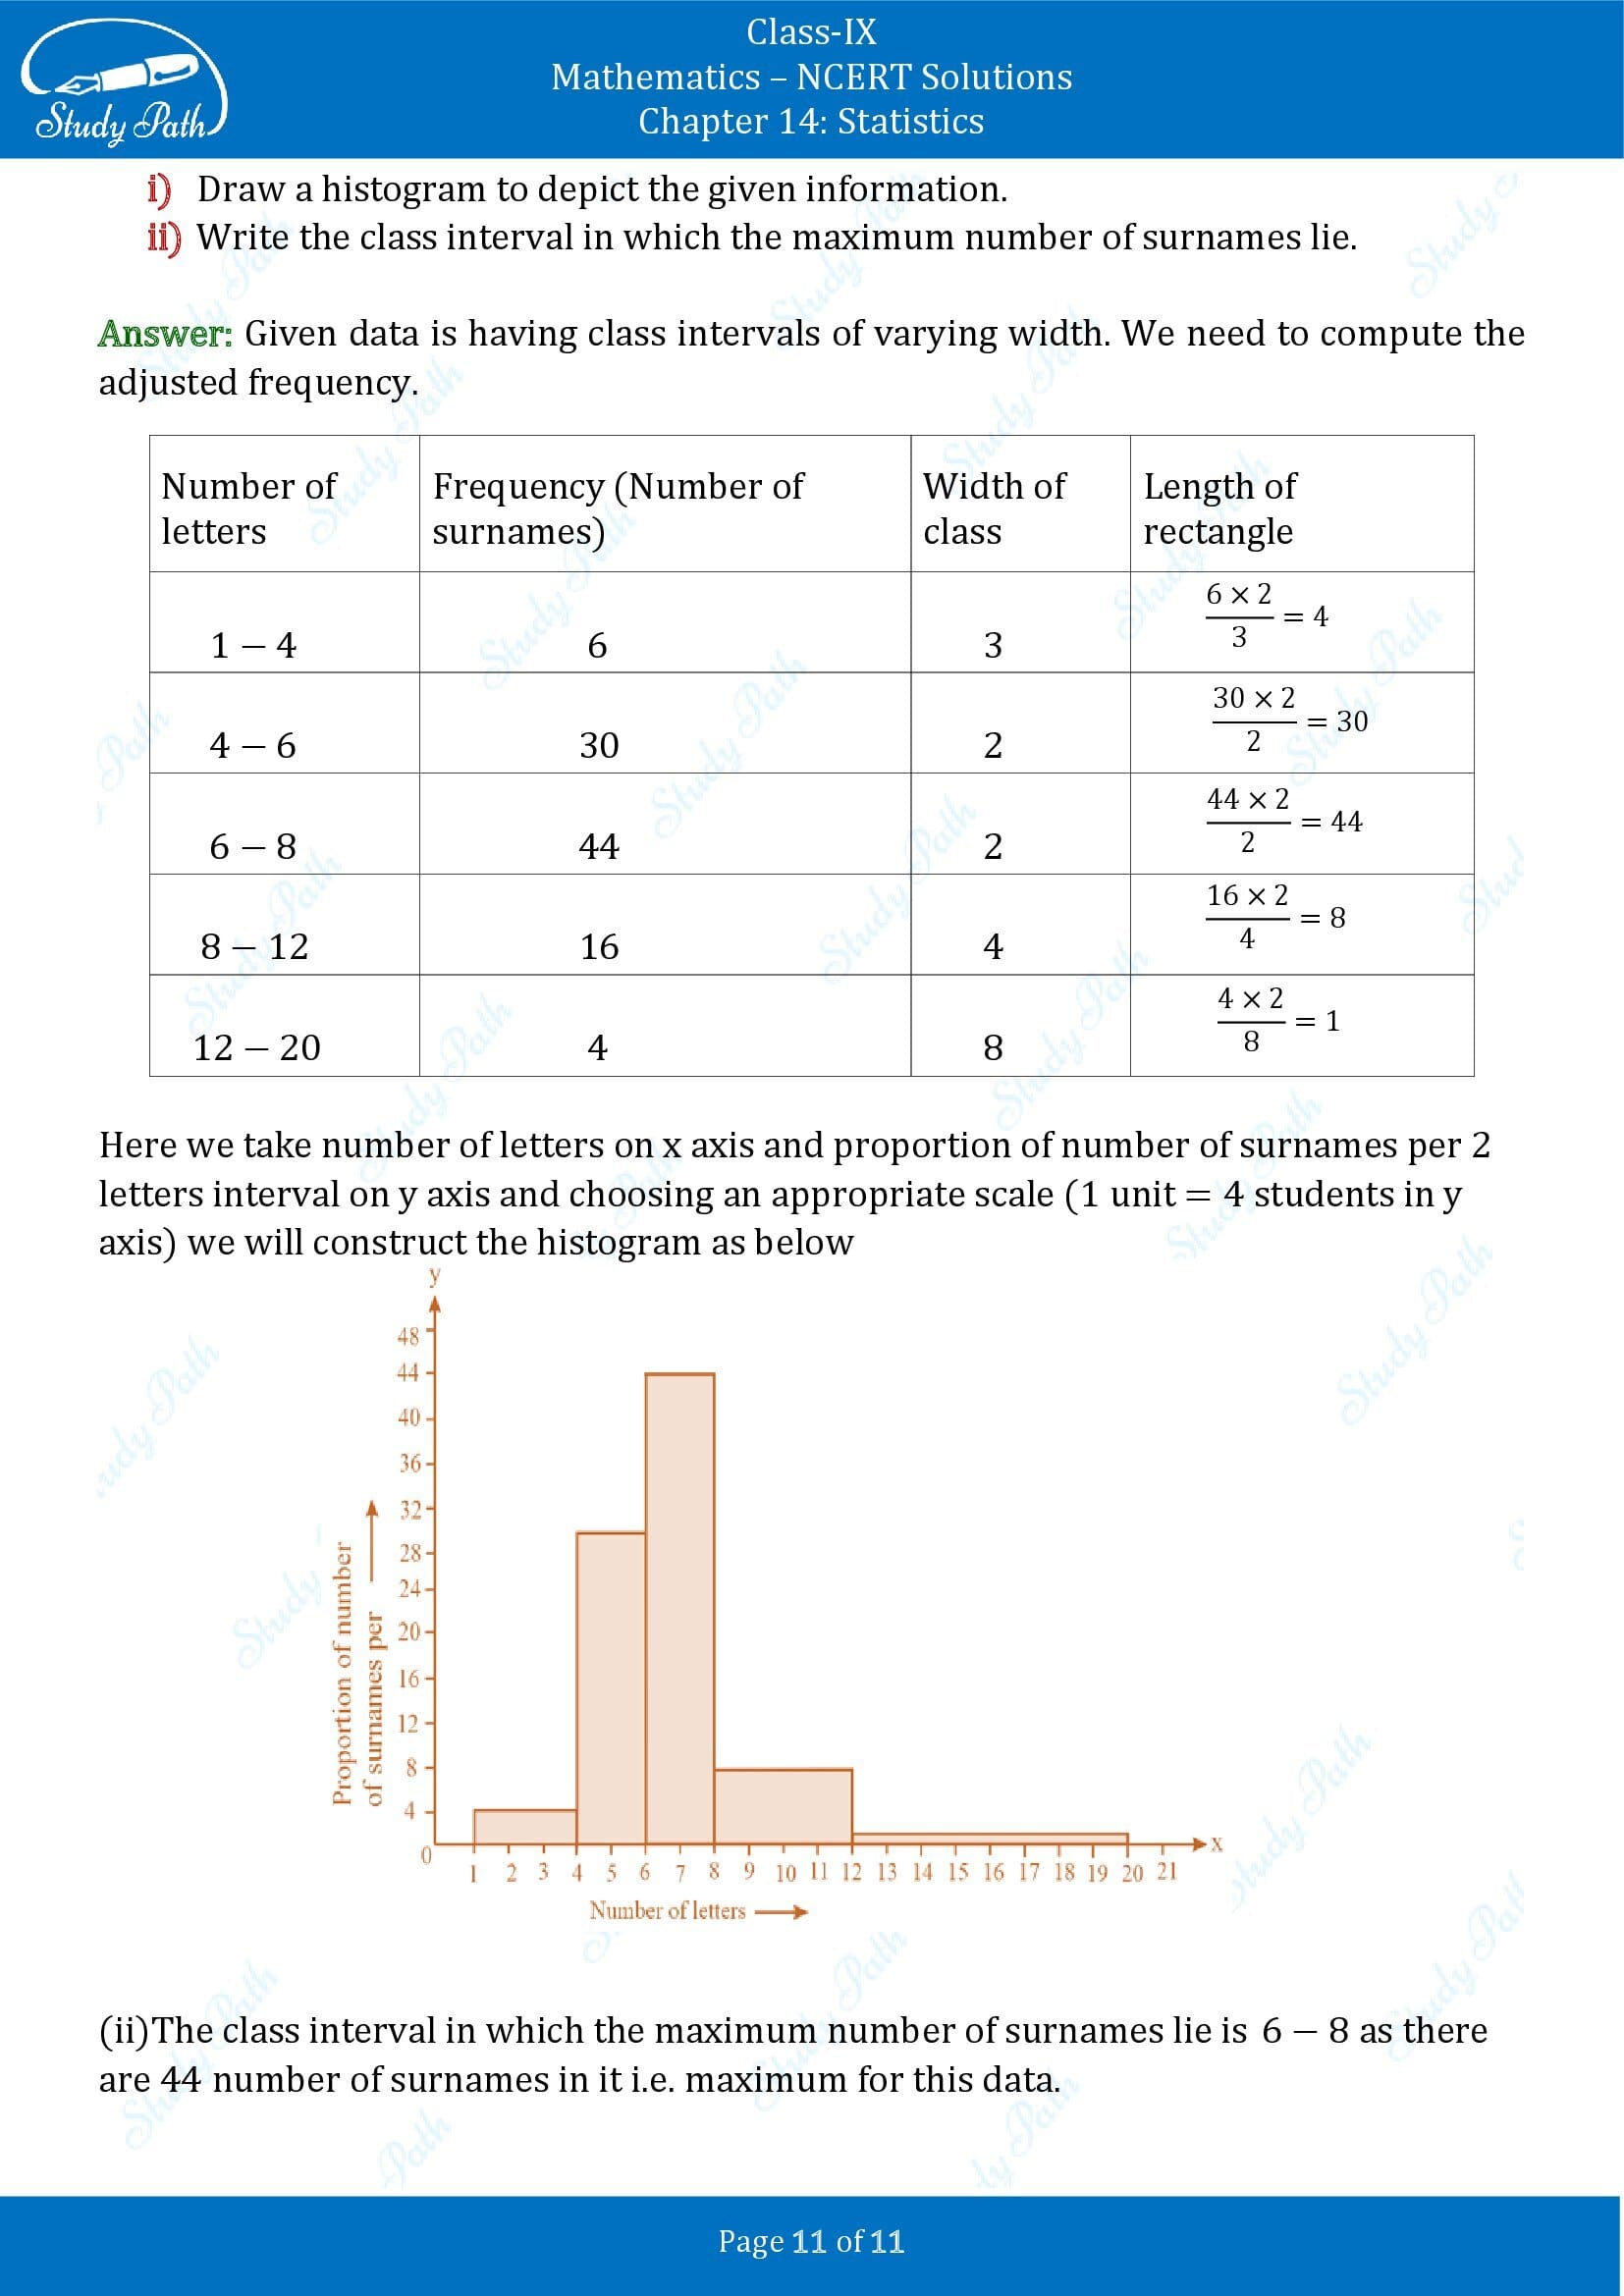 NCERT Solutions for Class 9 Maths Chapter 14 Statistics Exercise 14.3 00011